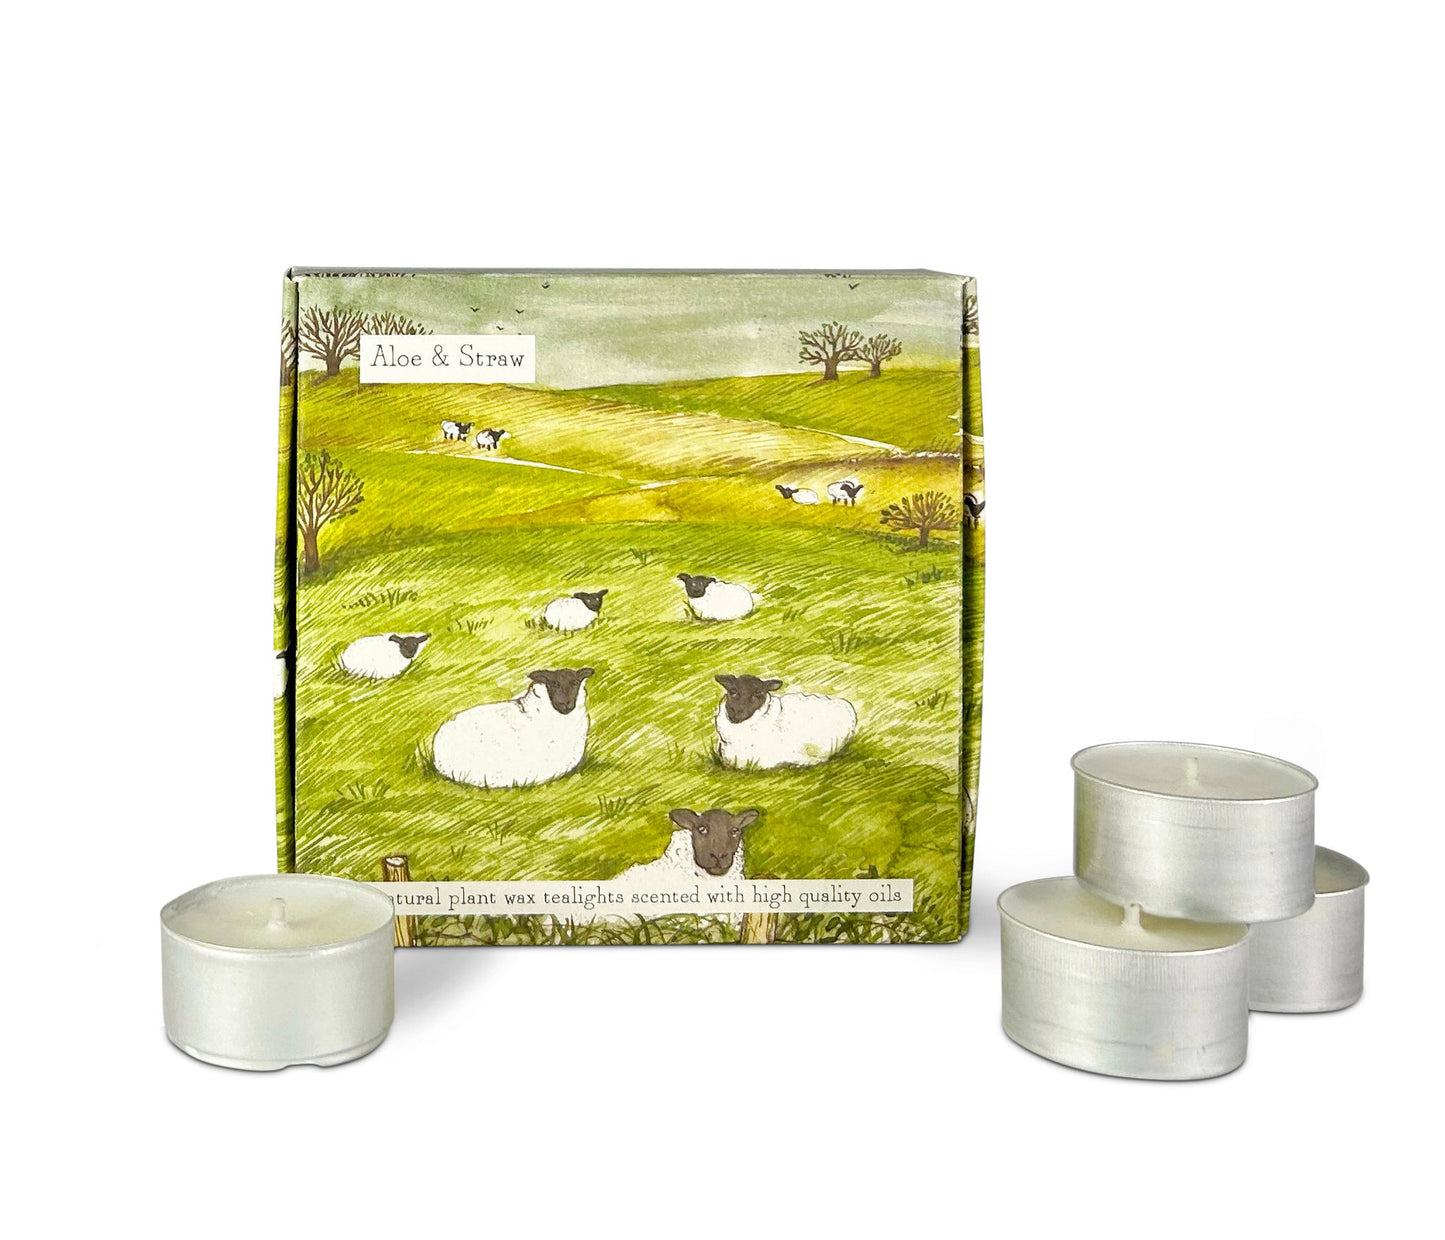 IIlustrated Box of 9 Scented Country Life Tea Lights Aloe & Straw (Sheep)